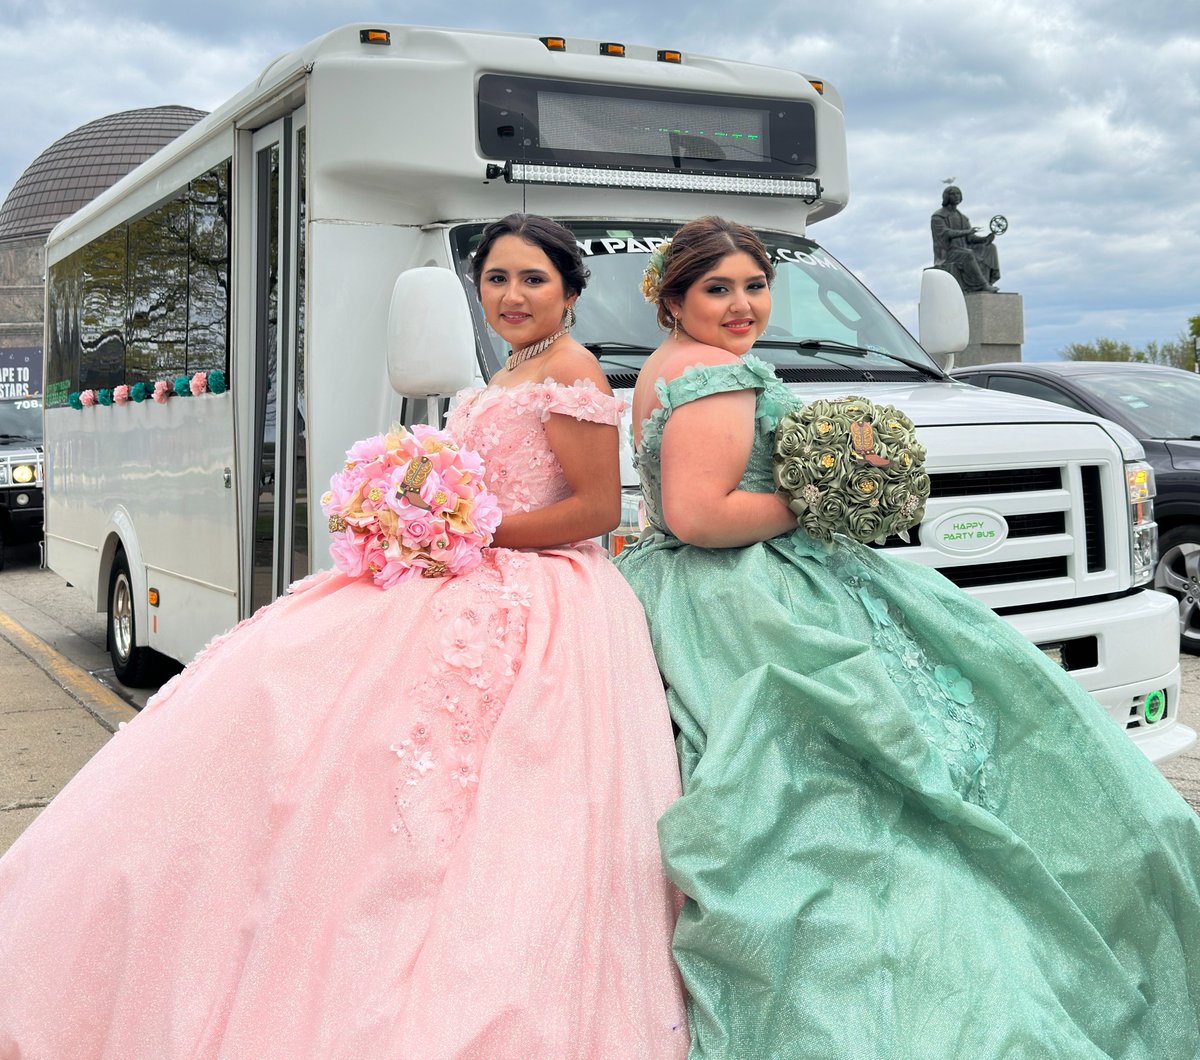 and more Happy customers with Happy Party Bus
#happypartybus #partybusrental #partybuschicago #rentpartybus
#partybusprom #partybuswedding #partybussportevents #partybusmusicconcerts #partybusbirthday
#prom #prompartybus #birthdayparty
#happyprom #BacheloretteParty